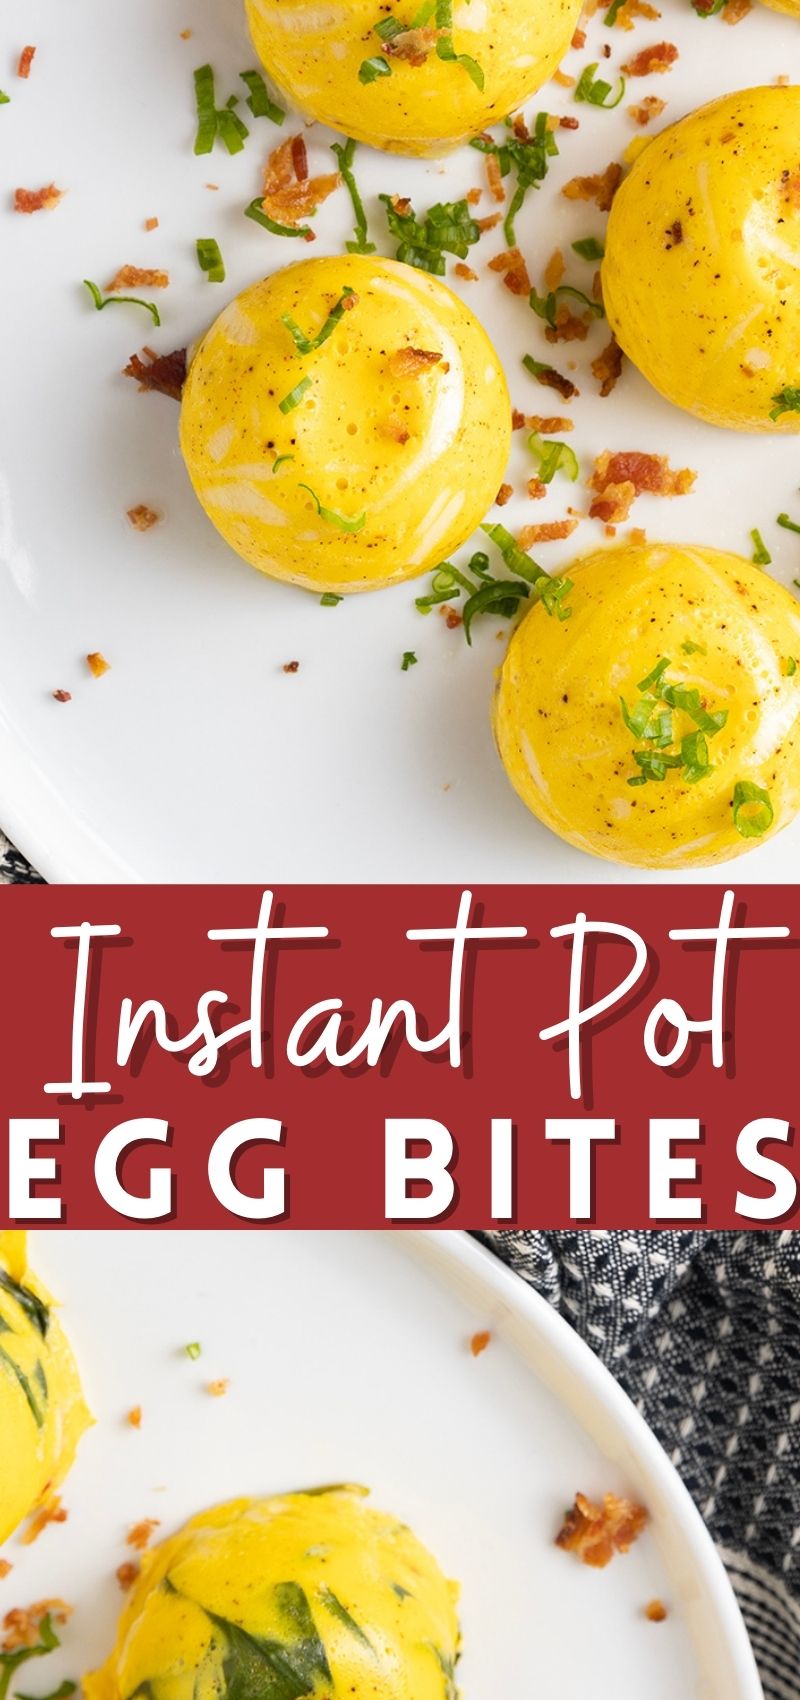 Pressure Cooker Egg Bites - What You Need to Know - Savvy Saving